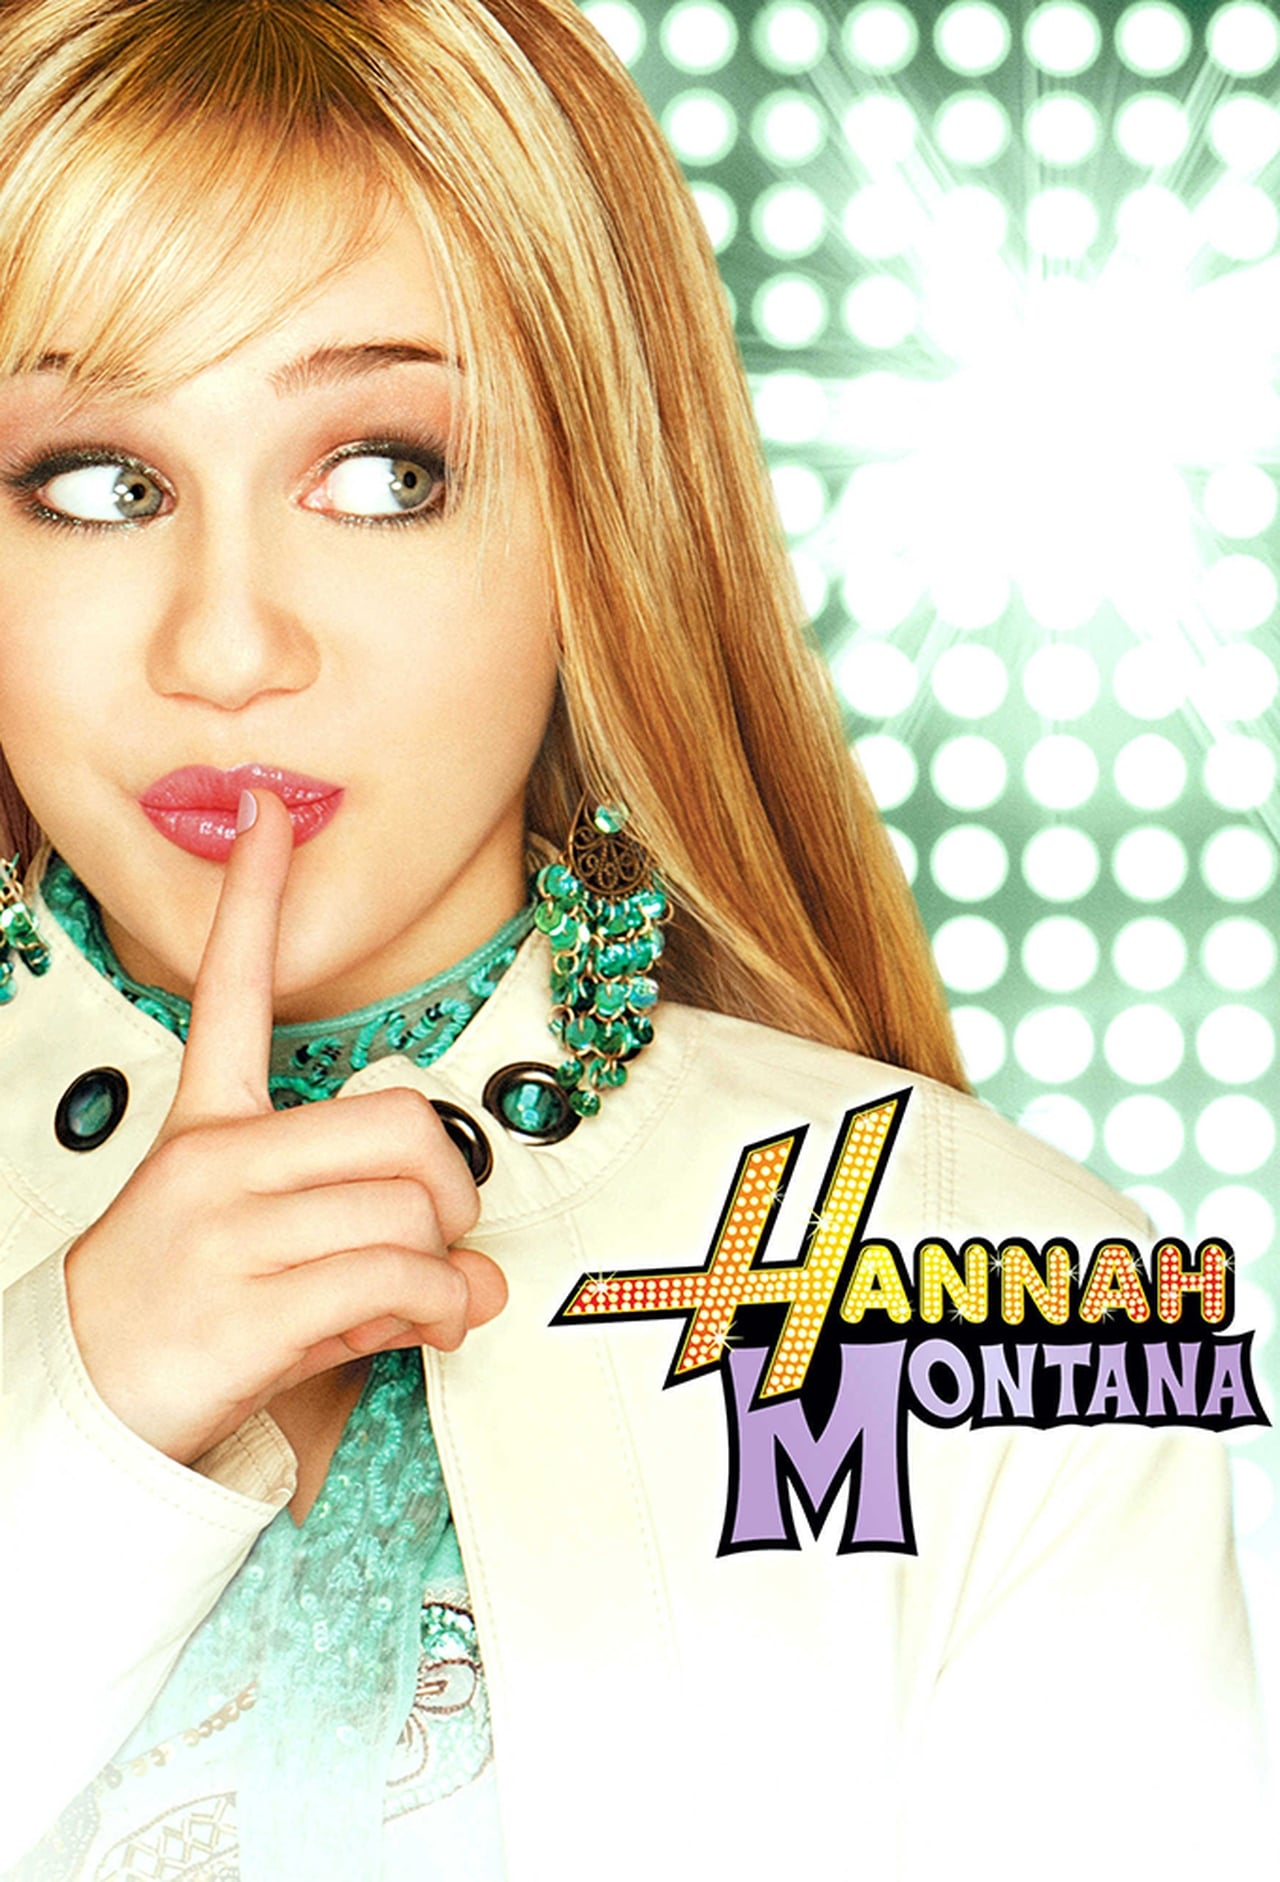 Hannah Montana, Vol. 1 release date, trailers, cast, synopsis and reviews